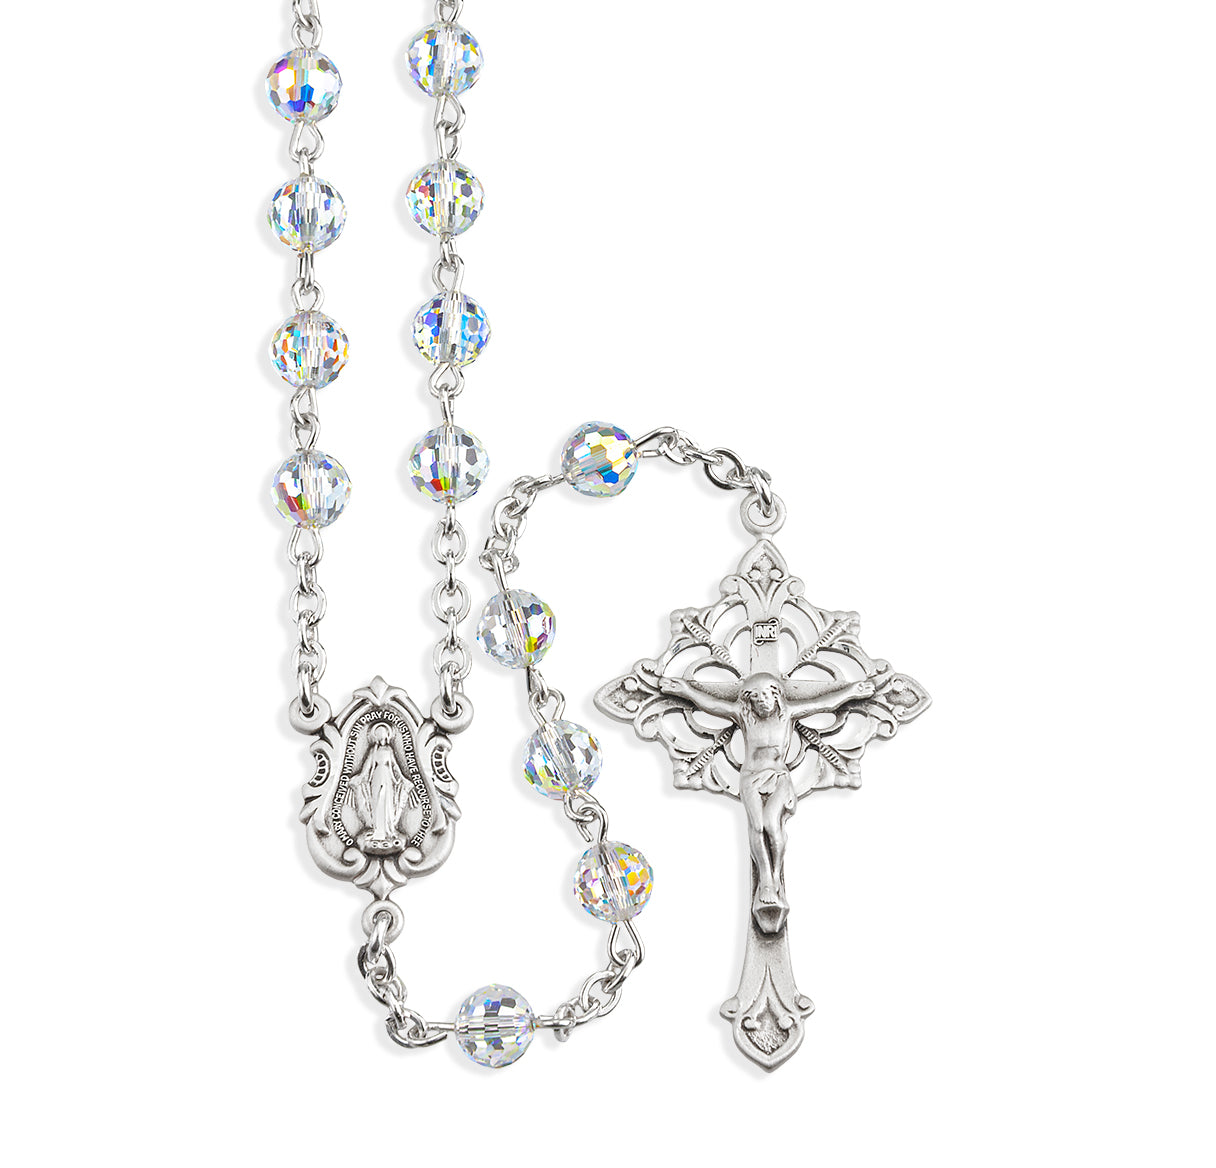 Sterling Silver Rosary Hand Made with Swarovski Crystal 8mm Round Multi-Faceted Beads by HMH